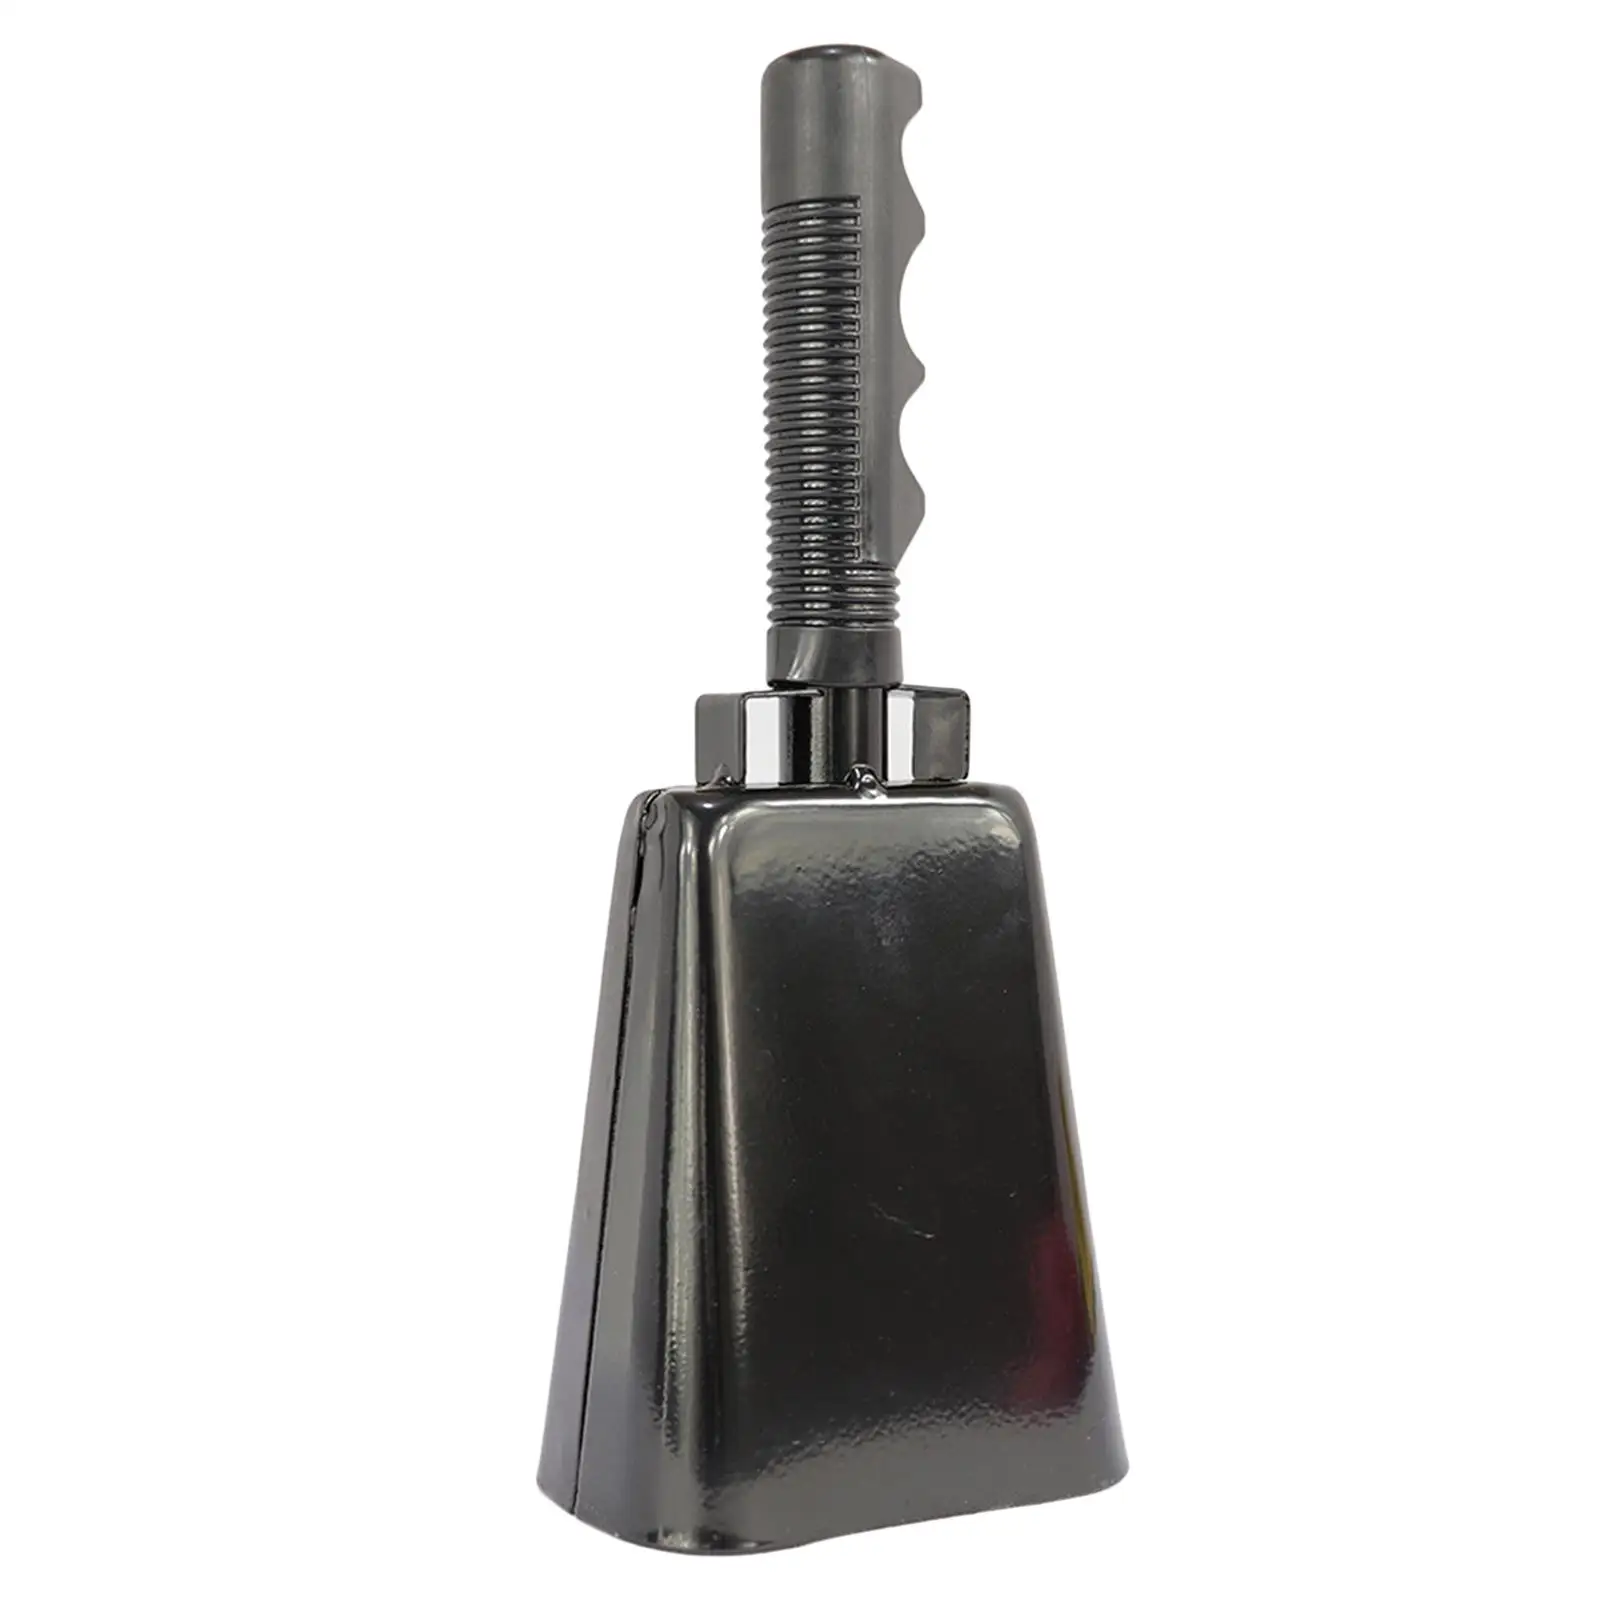 Musical Handbell Cheering Bell Metal Cowbell Percussion for Holiday Party